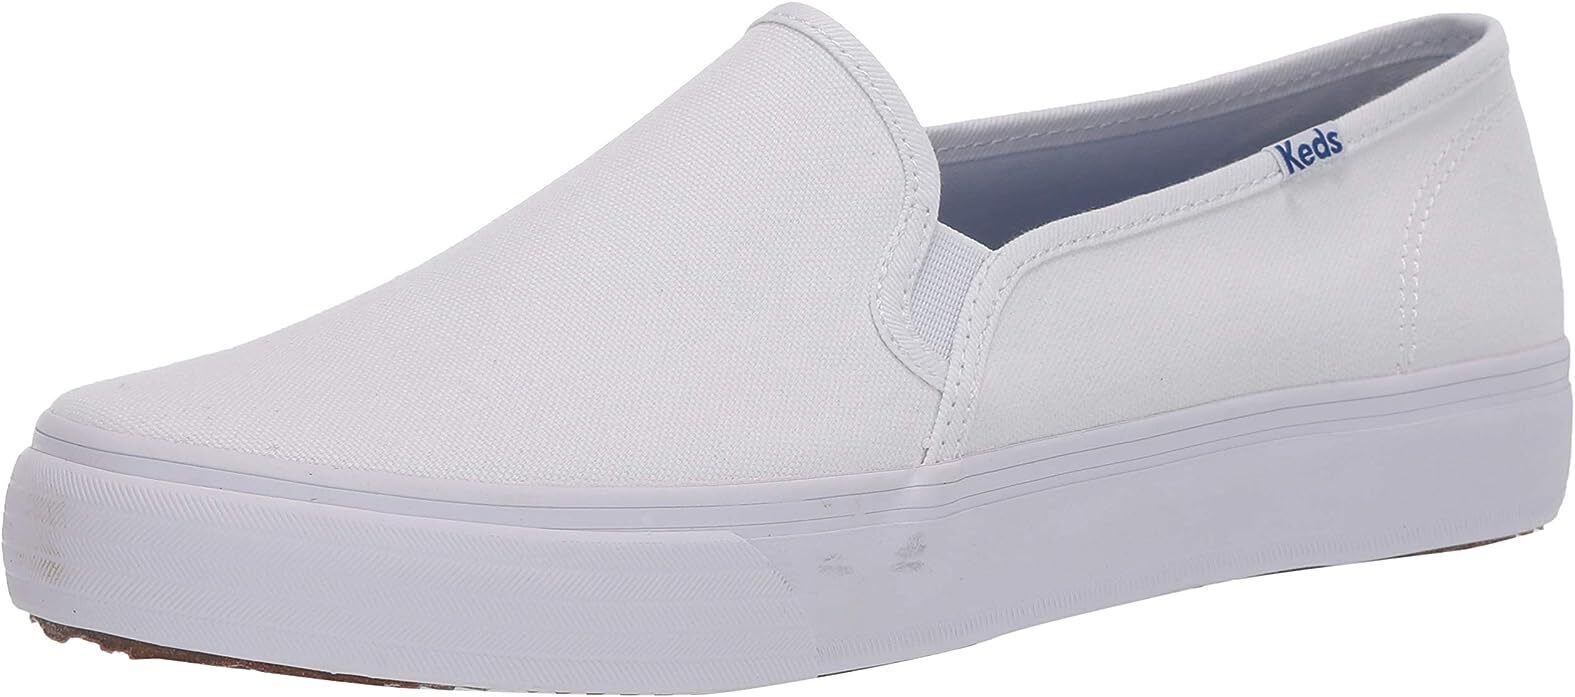 Keds Womens Anchor Slip Leather Sneakers